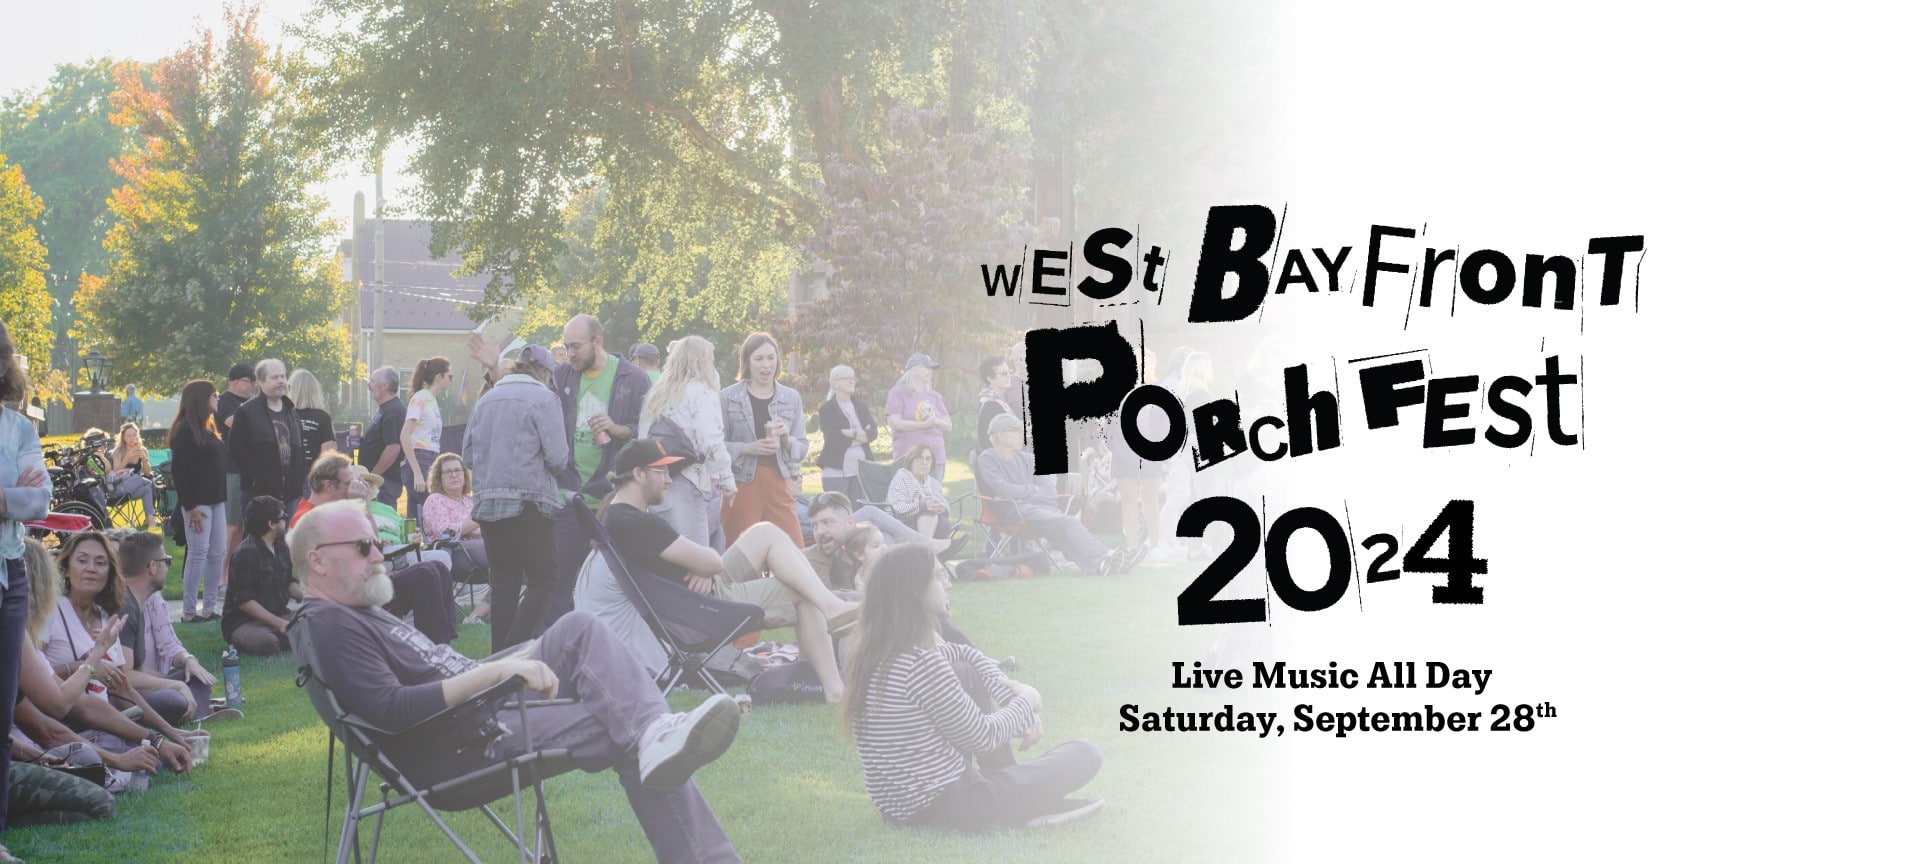 West Bayfront PorchFest 2024 Applications are Now Open! Our West Bayfront